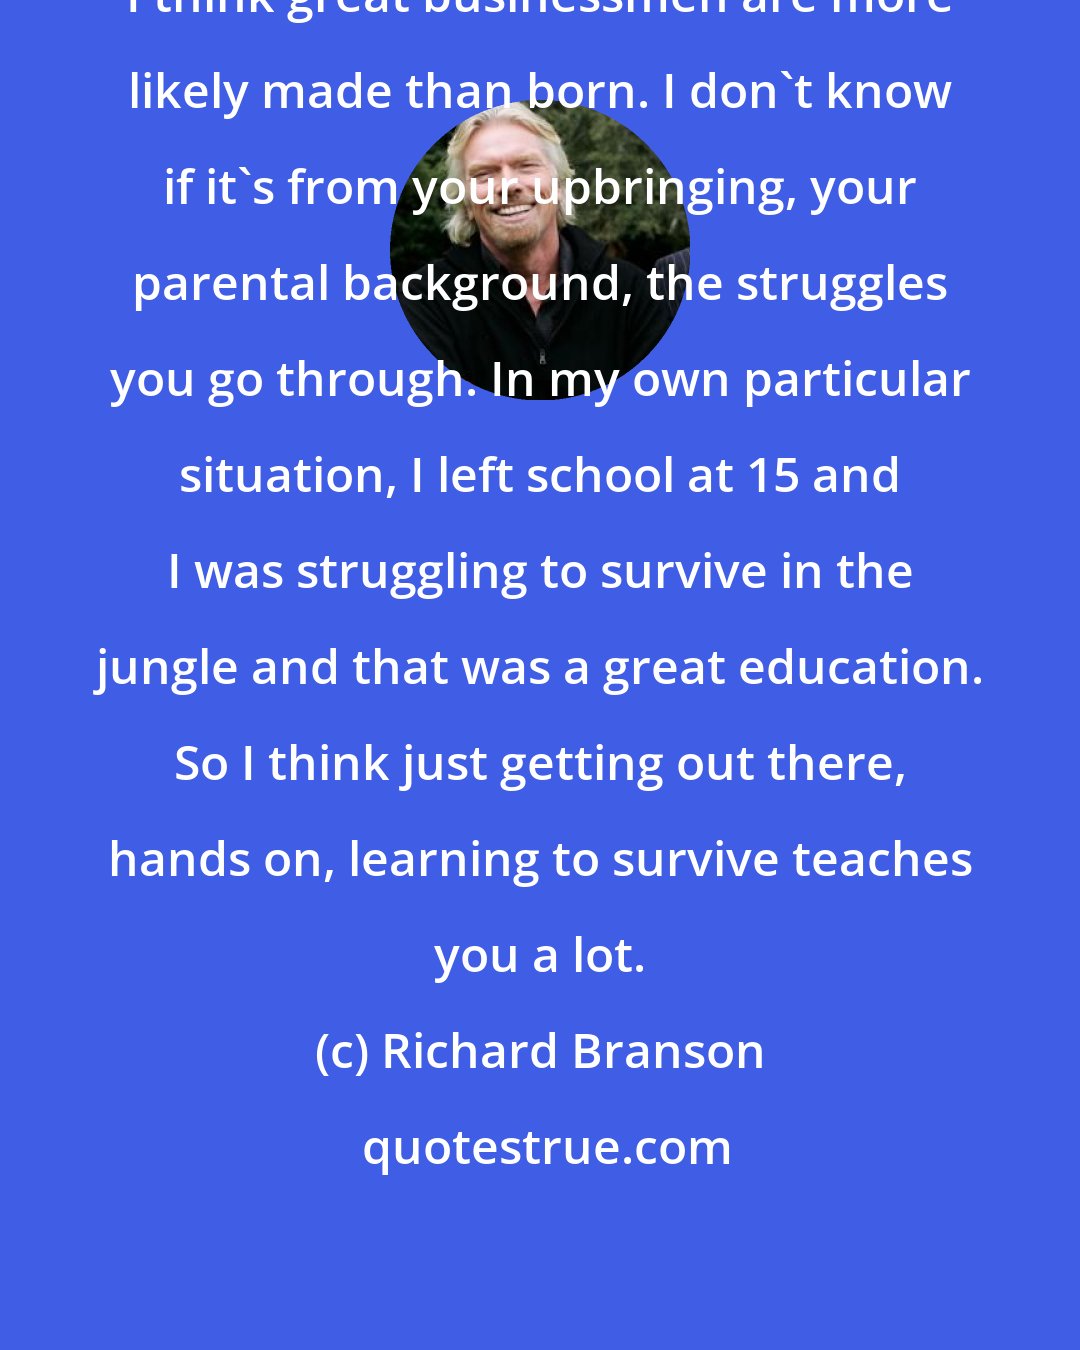 Richard Branson: I think great businessmen are more likely made than born. I don't know if it's from your upbringing, your parental background, the struggles you go through. In my own particular situation, I left school at 15 and I was struggling to survive in the jungle and that was a great education. So I think just getting out there, hands on, learning to survive teaches you a lot.